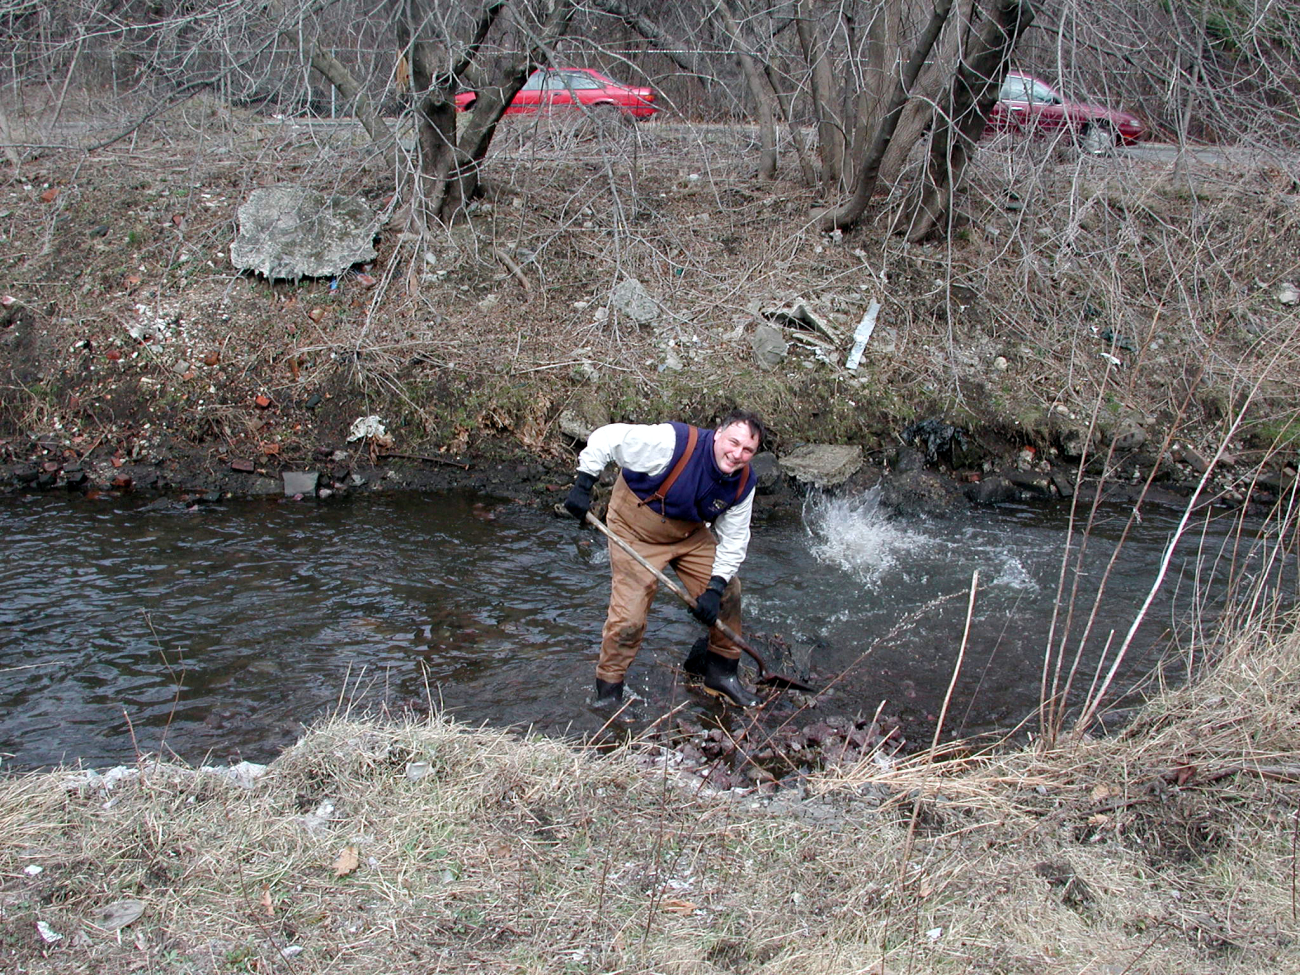 Mike Armstrong, Massachusetts Department of Marine Fisheries,pitches in at the restoration site